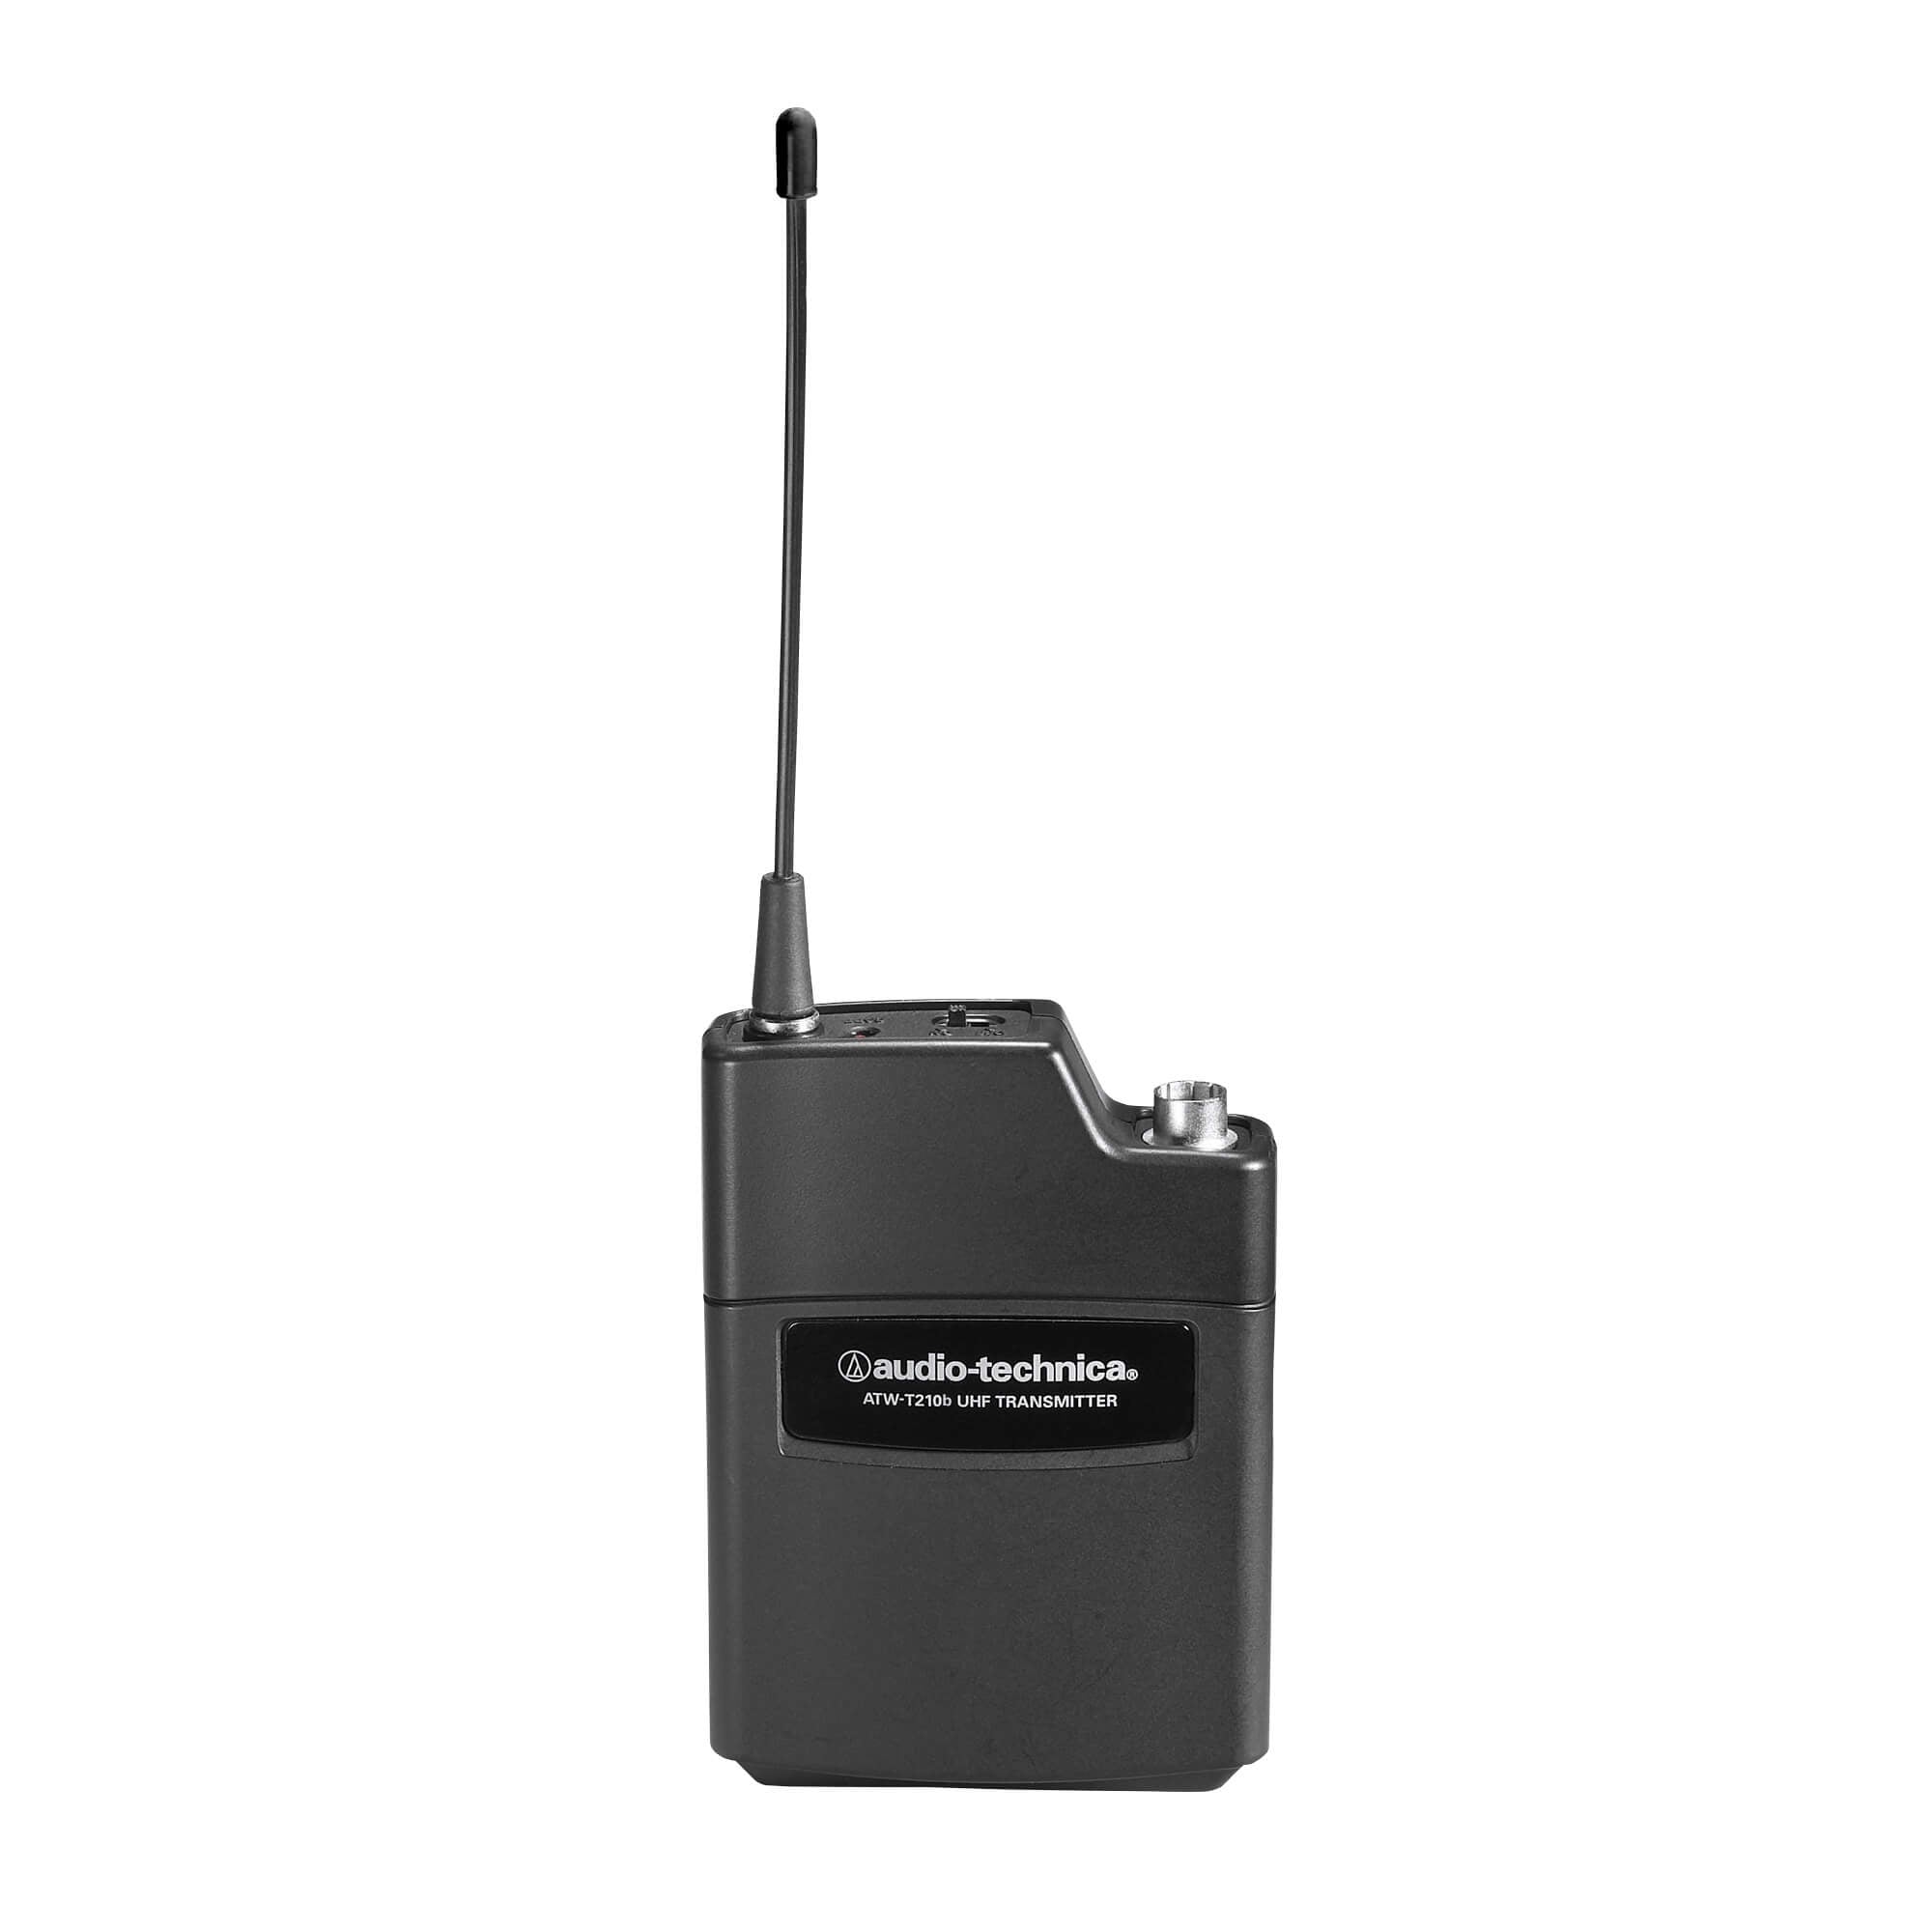 Audio-Technica ATW-T210c - Body-pack Transmitter (2000 Series), front